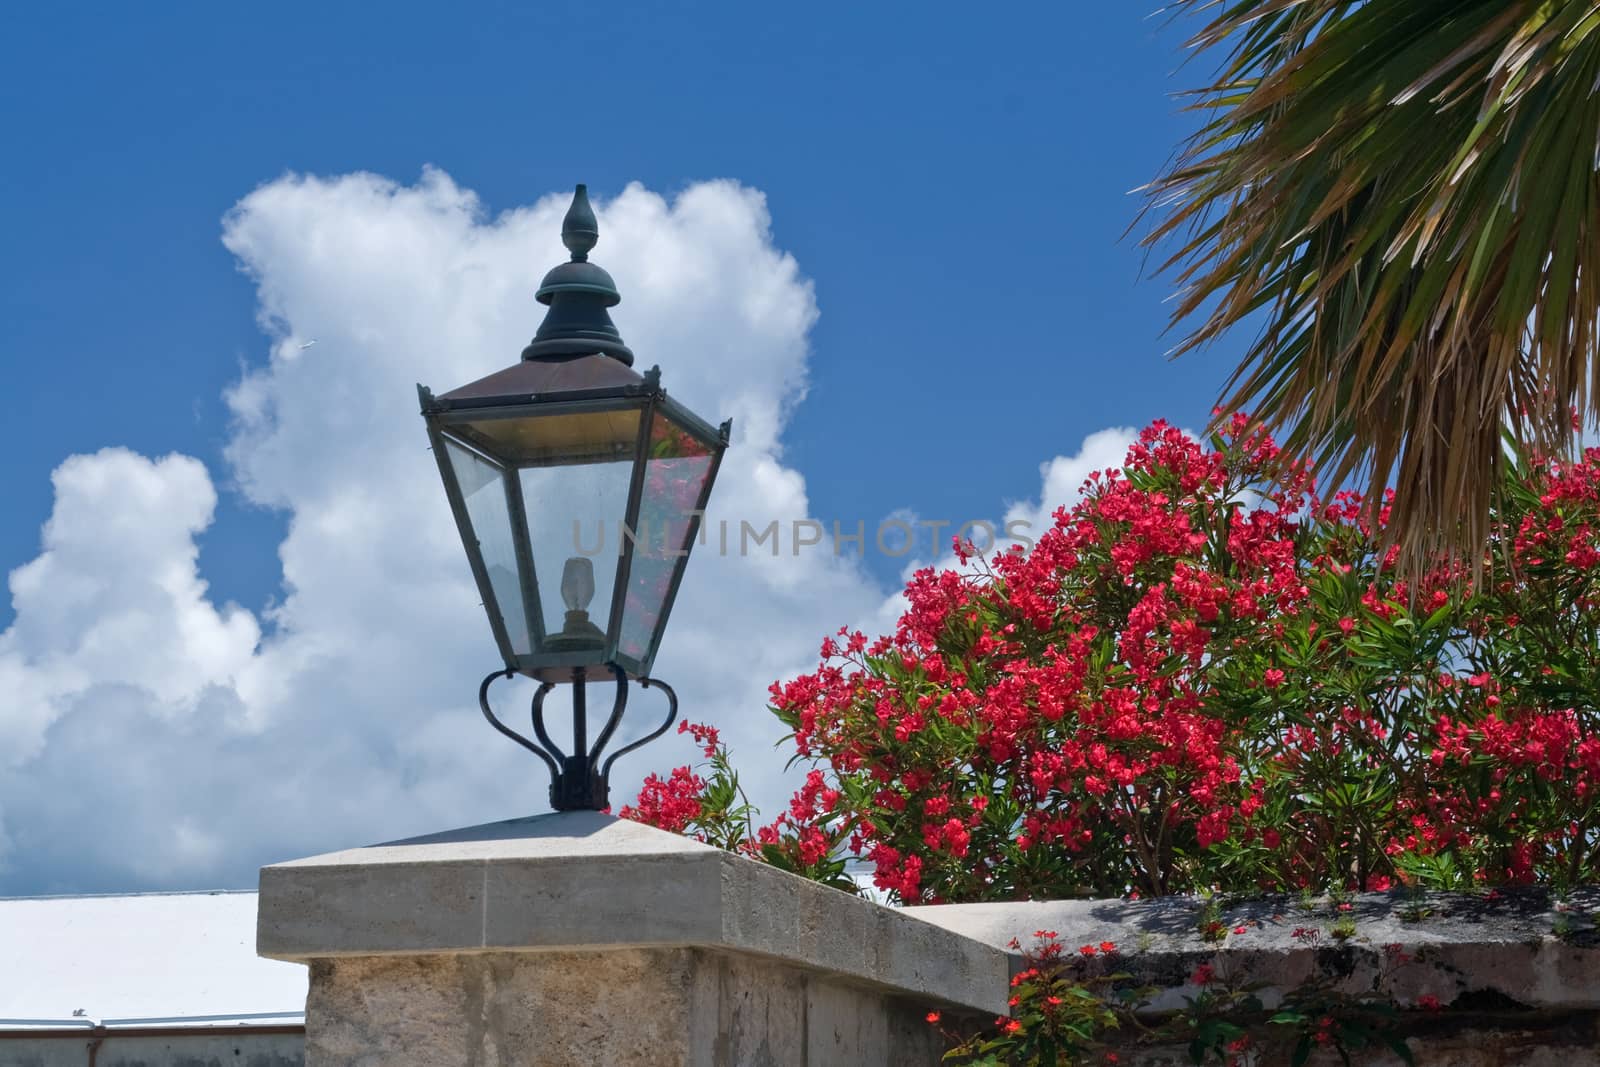 Ornate Lampshade and Bougainvillea by gary_parker